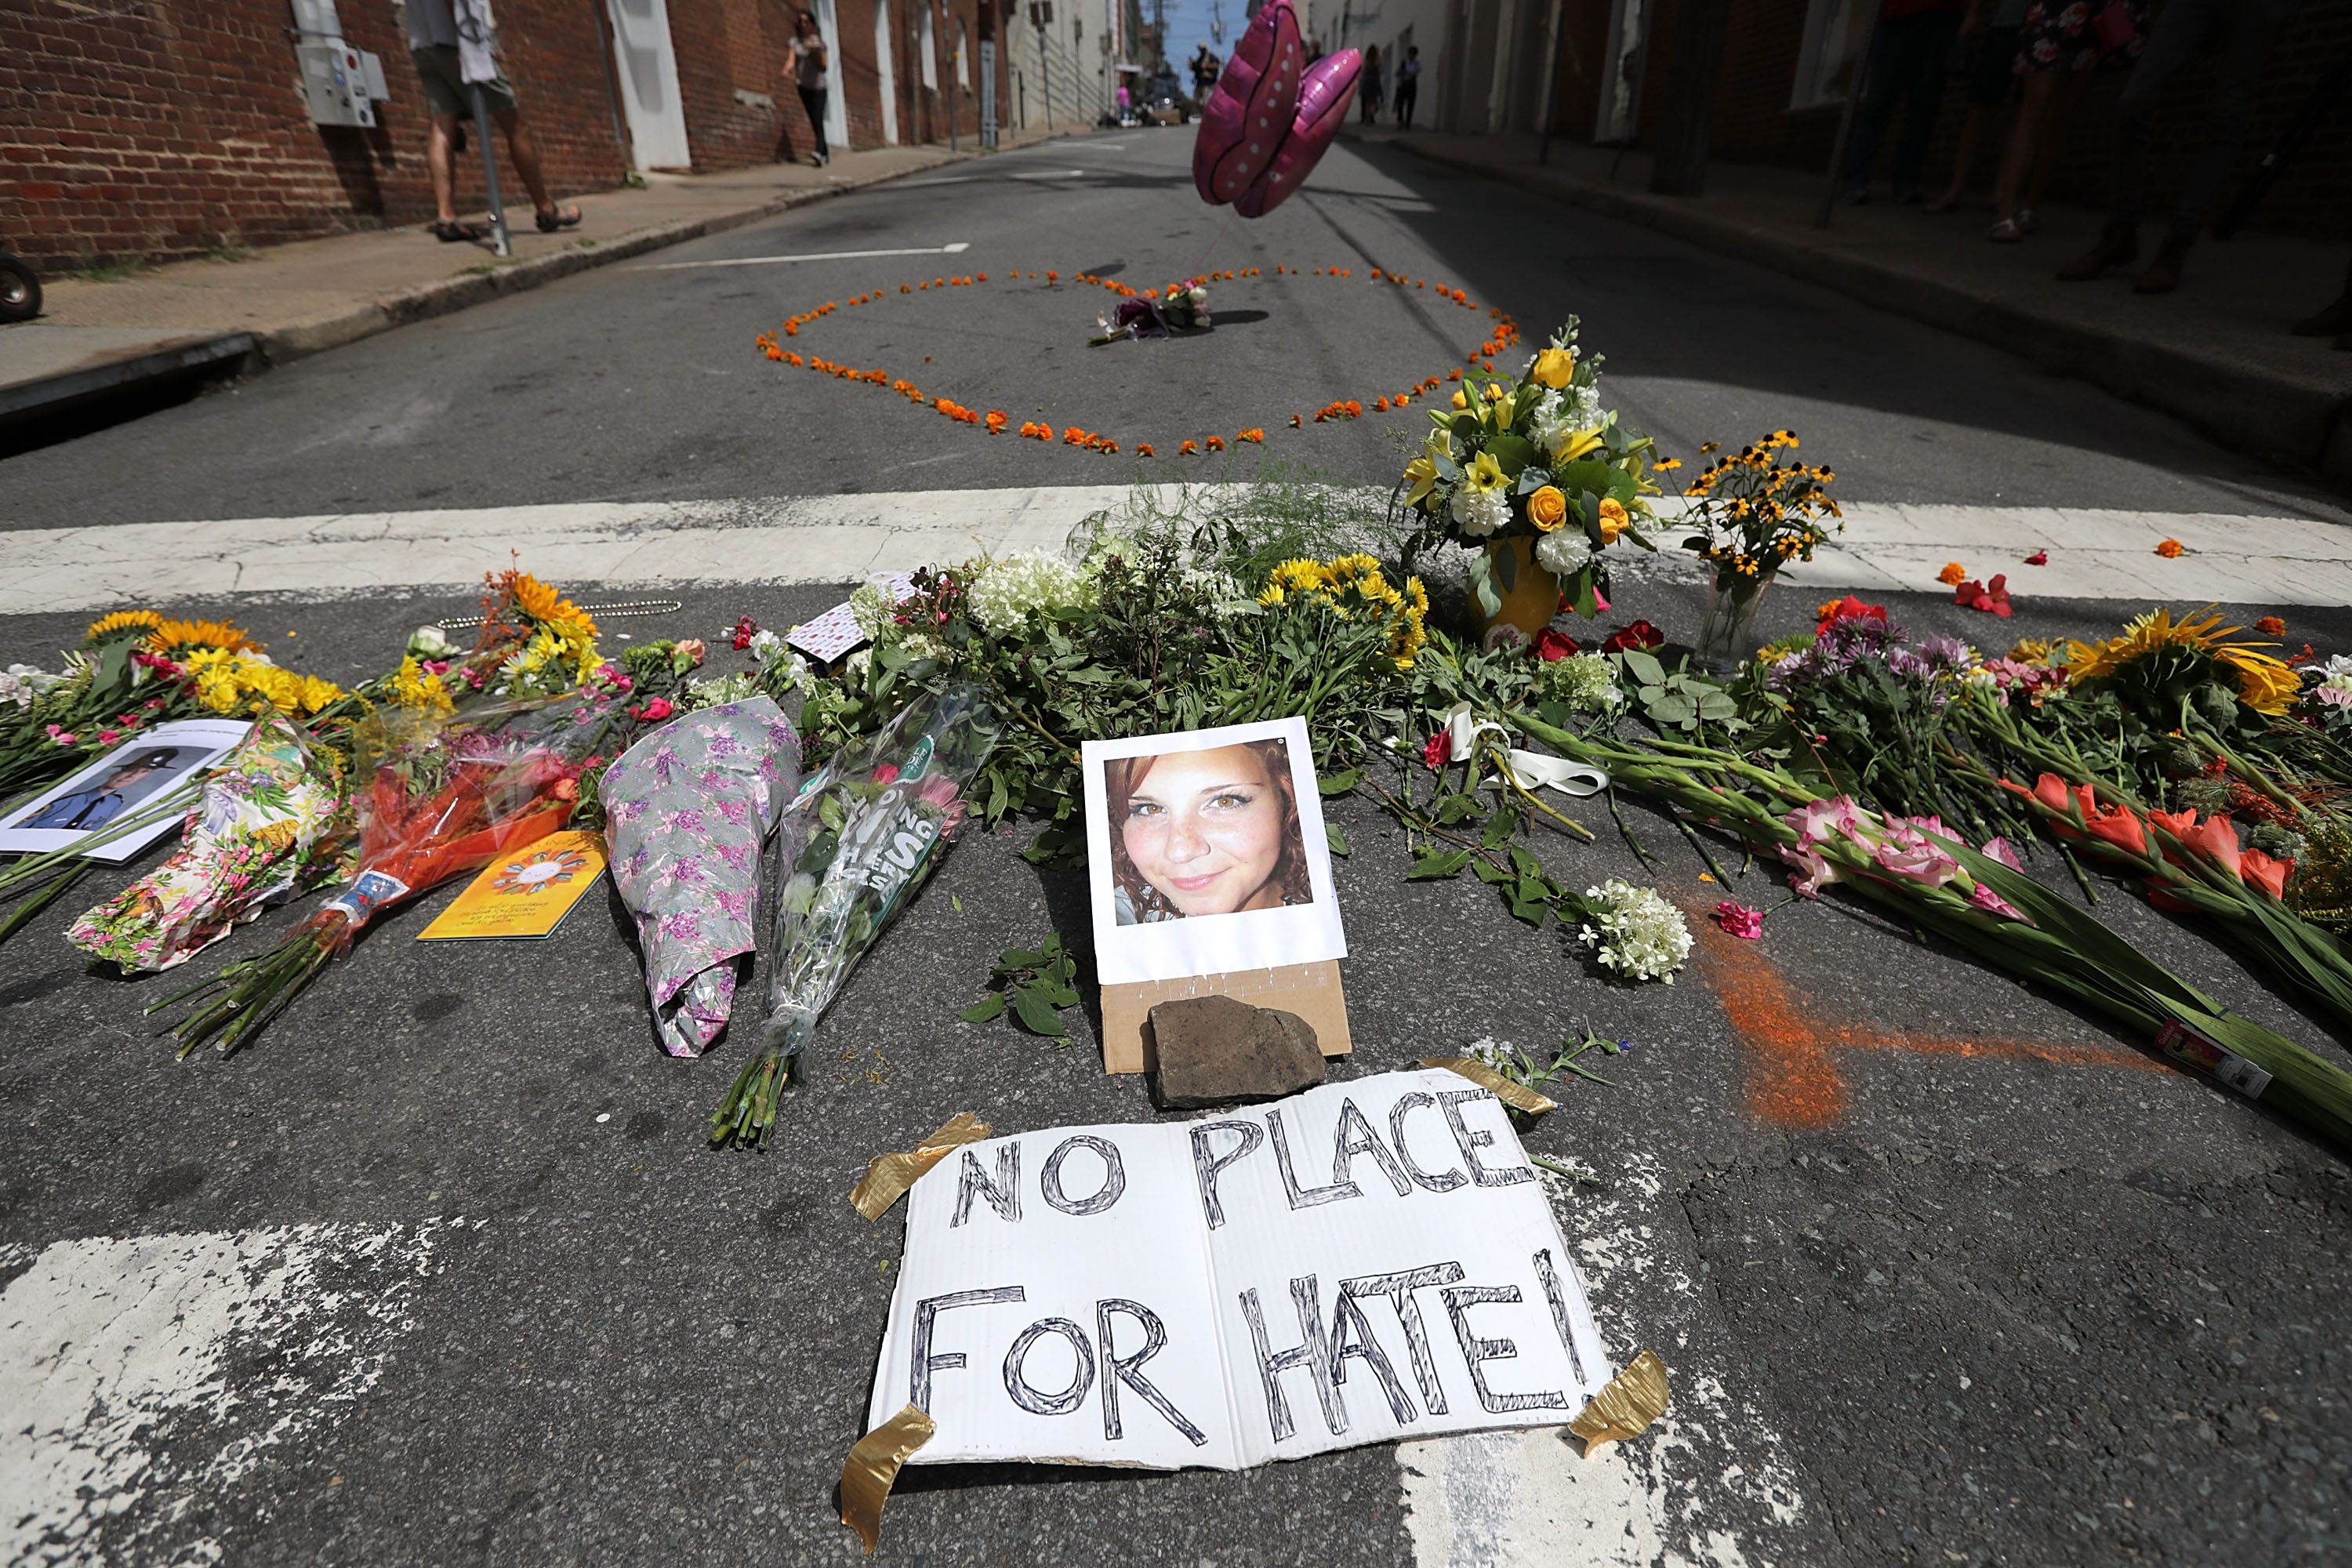 Flowers surround a photo of 32-year-old Heather Heyer, who was killed when a car plowed into a crowd of people protesting against the white supremacist Unite the Right rally, August 13, 2017 in Charlottesville, Va. (Chip Somodevilla—Getty Images)